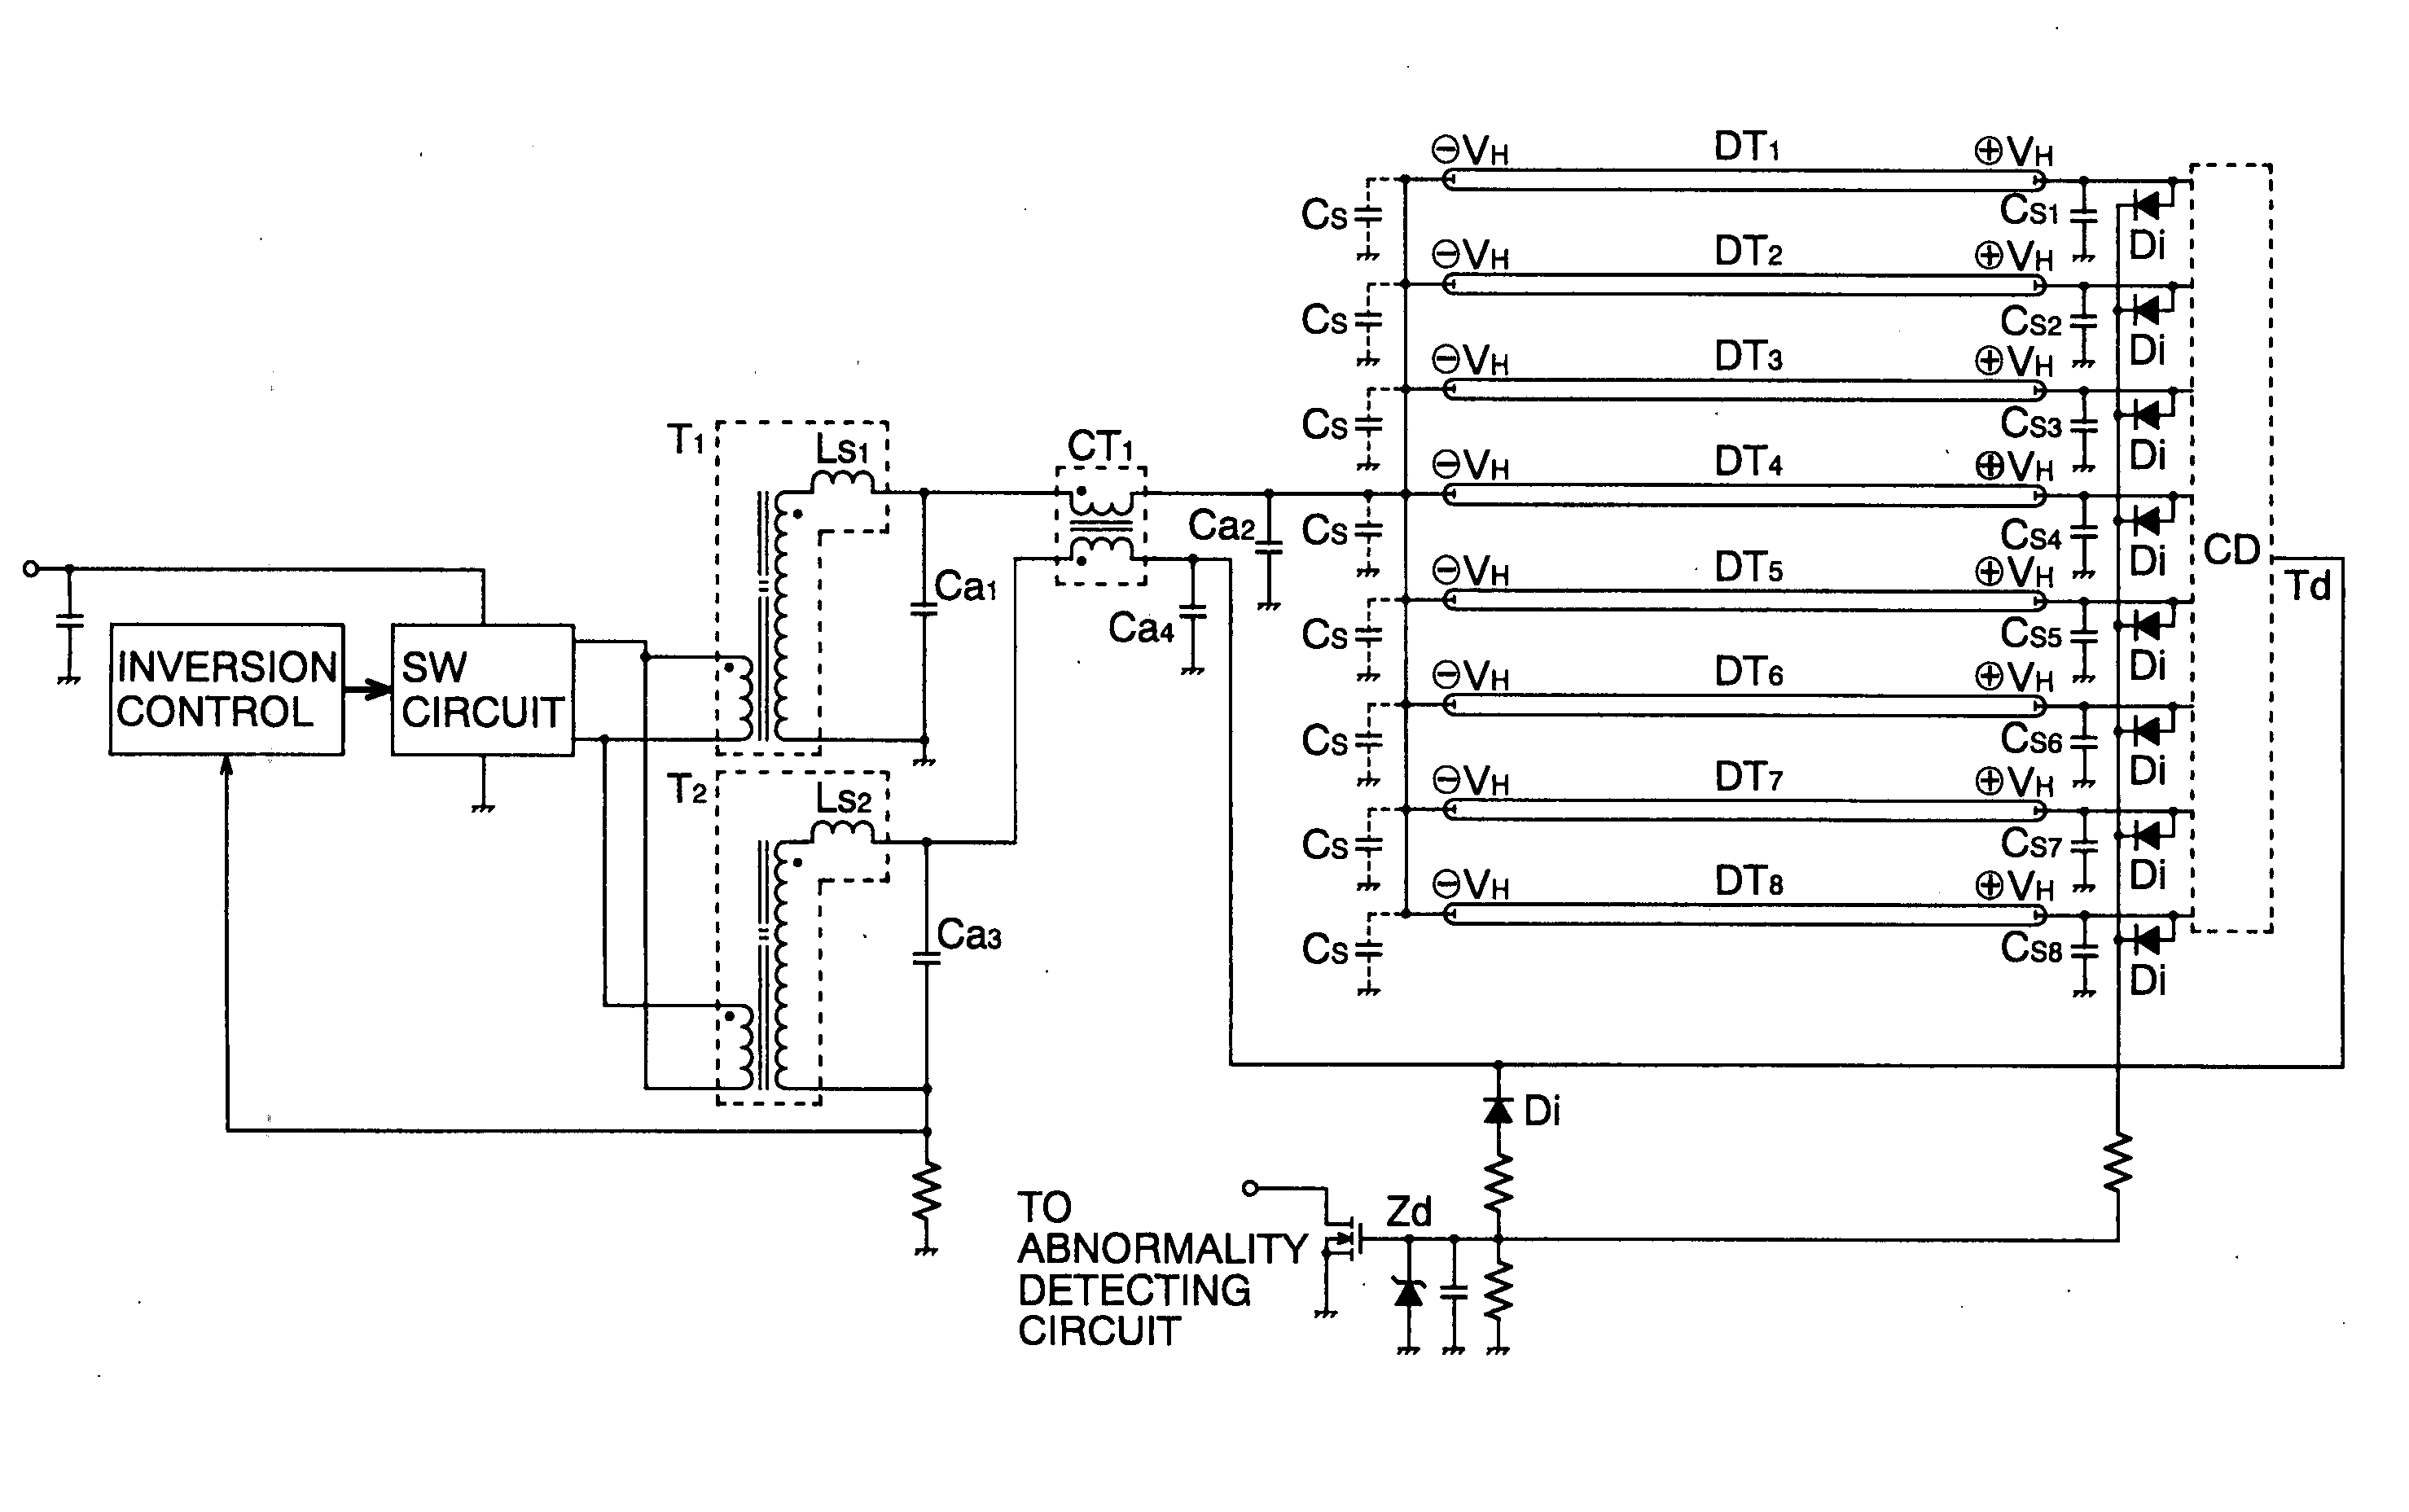 Parallel lighting system for surface light source discharge lamps